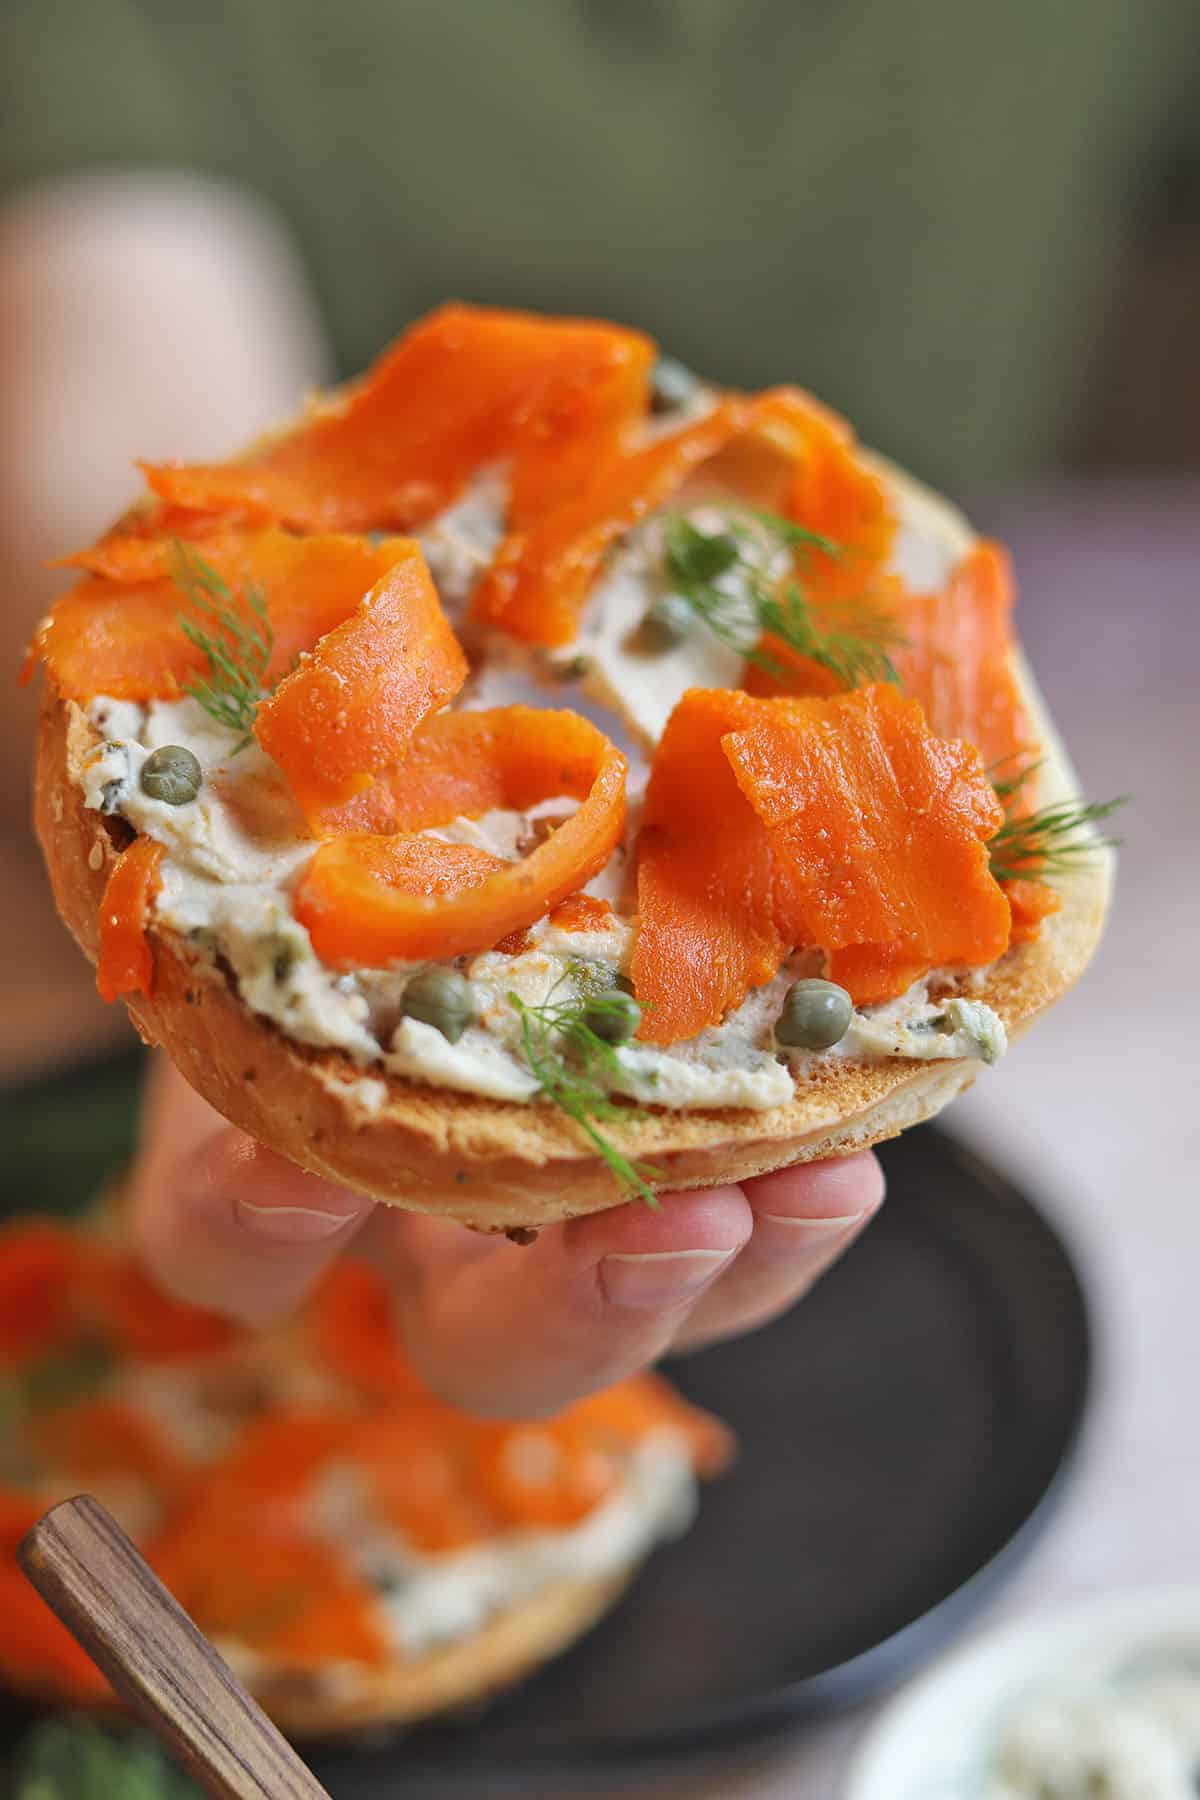 Hand holding bagel with vegan lox, non-dairy cream cheese, capers, and dill.